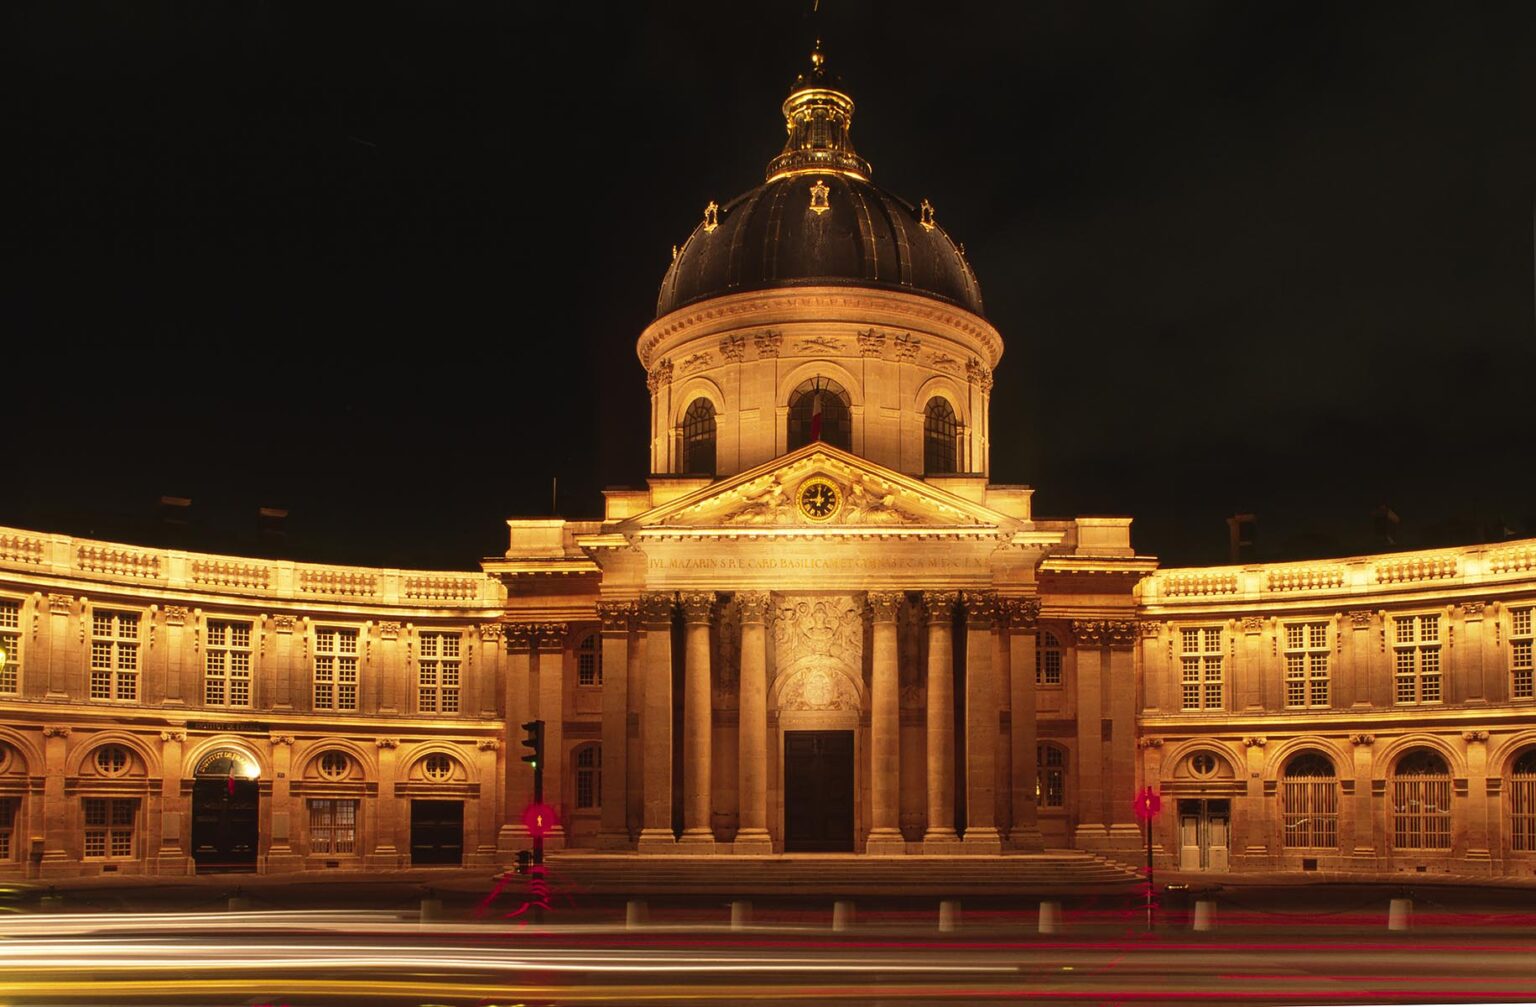 Night shot of the INSTITUTE OF FRANCE - PARIS, FRANCE